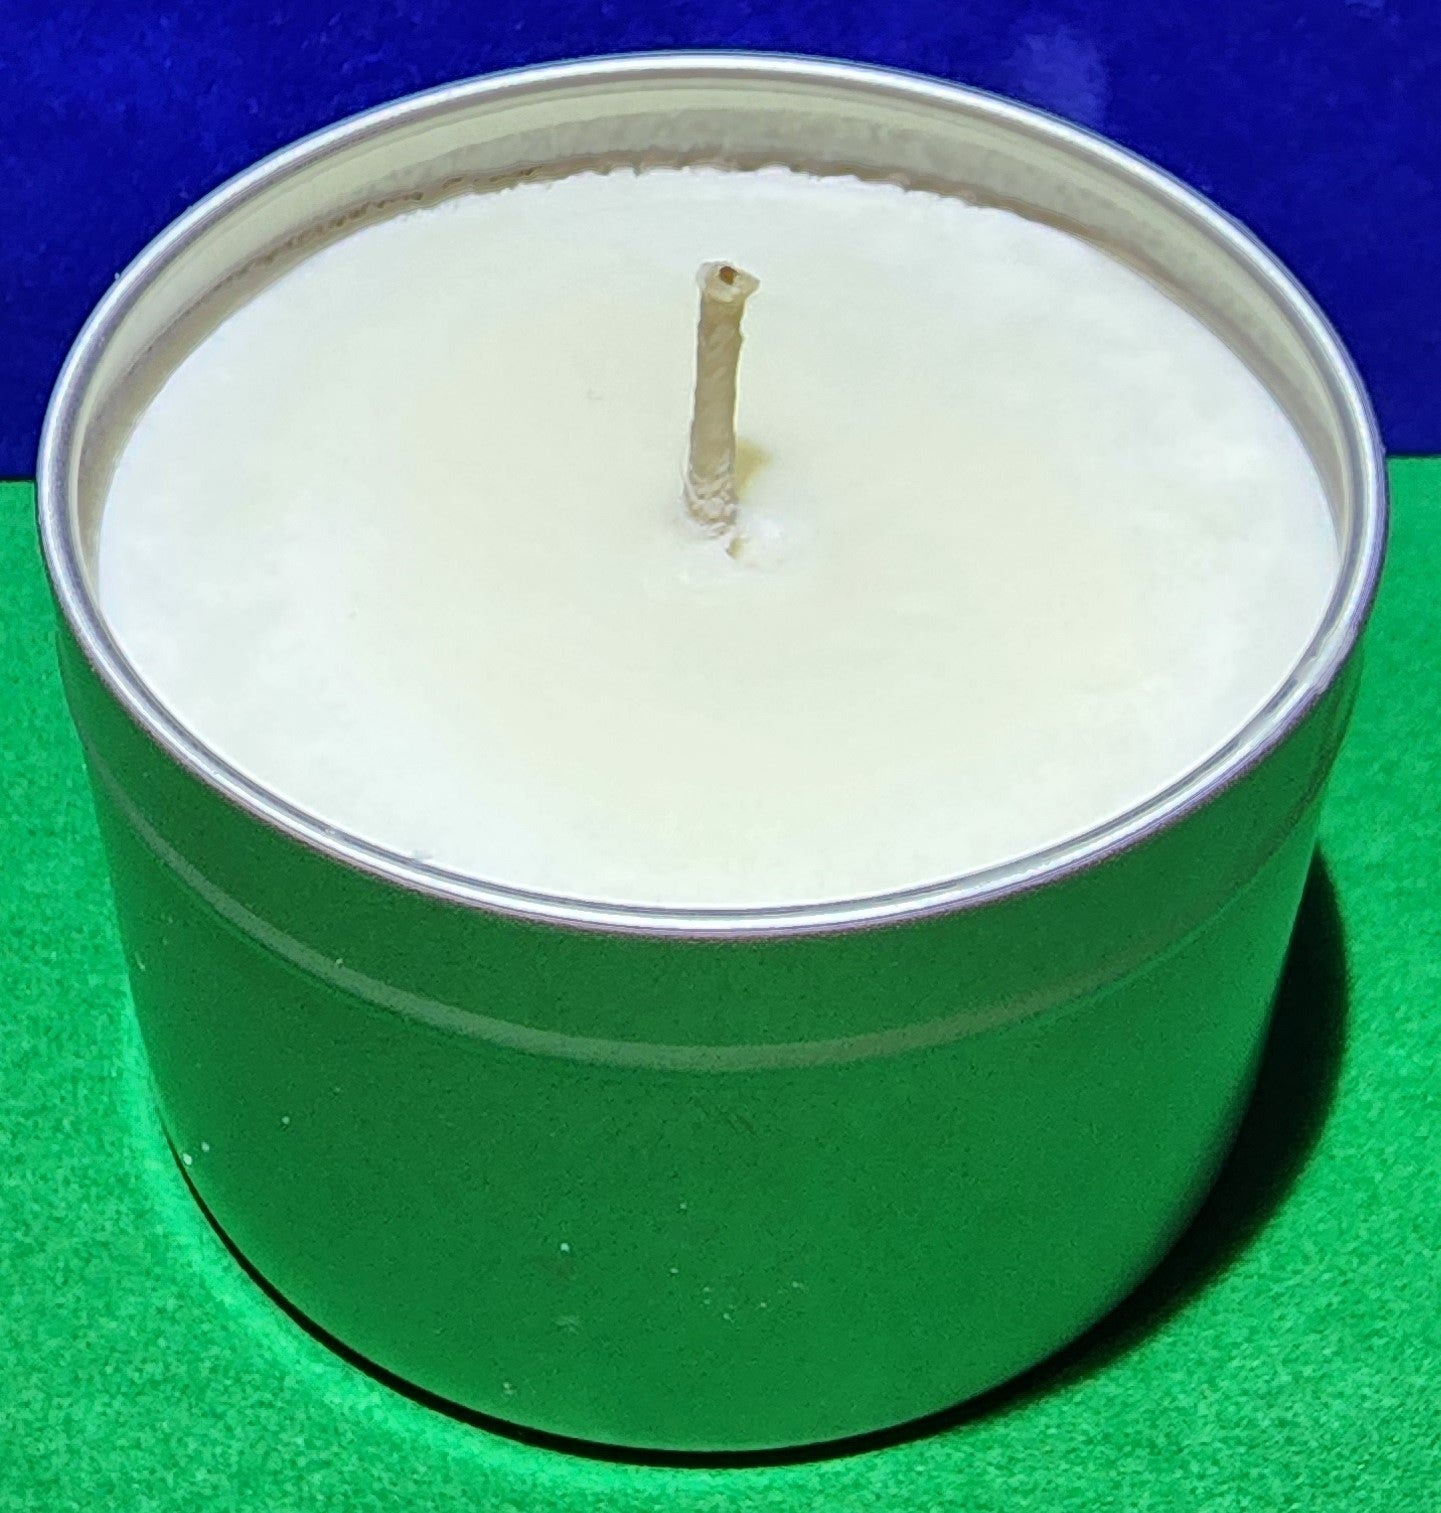 Cannabis Flower Soy Candles & Wax Melts